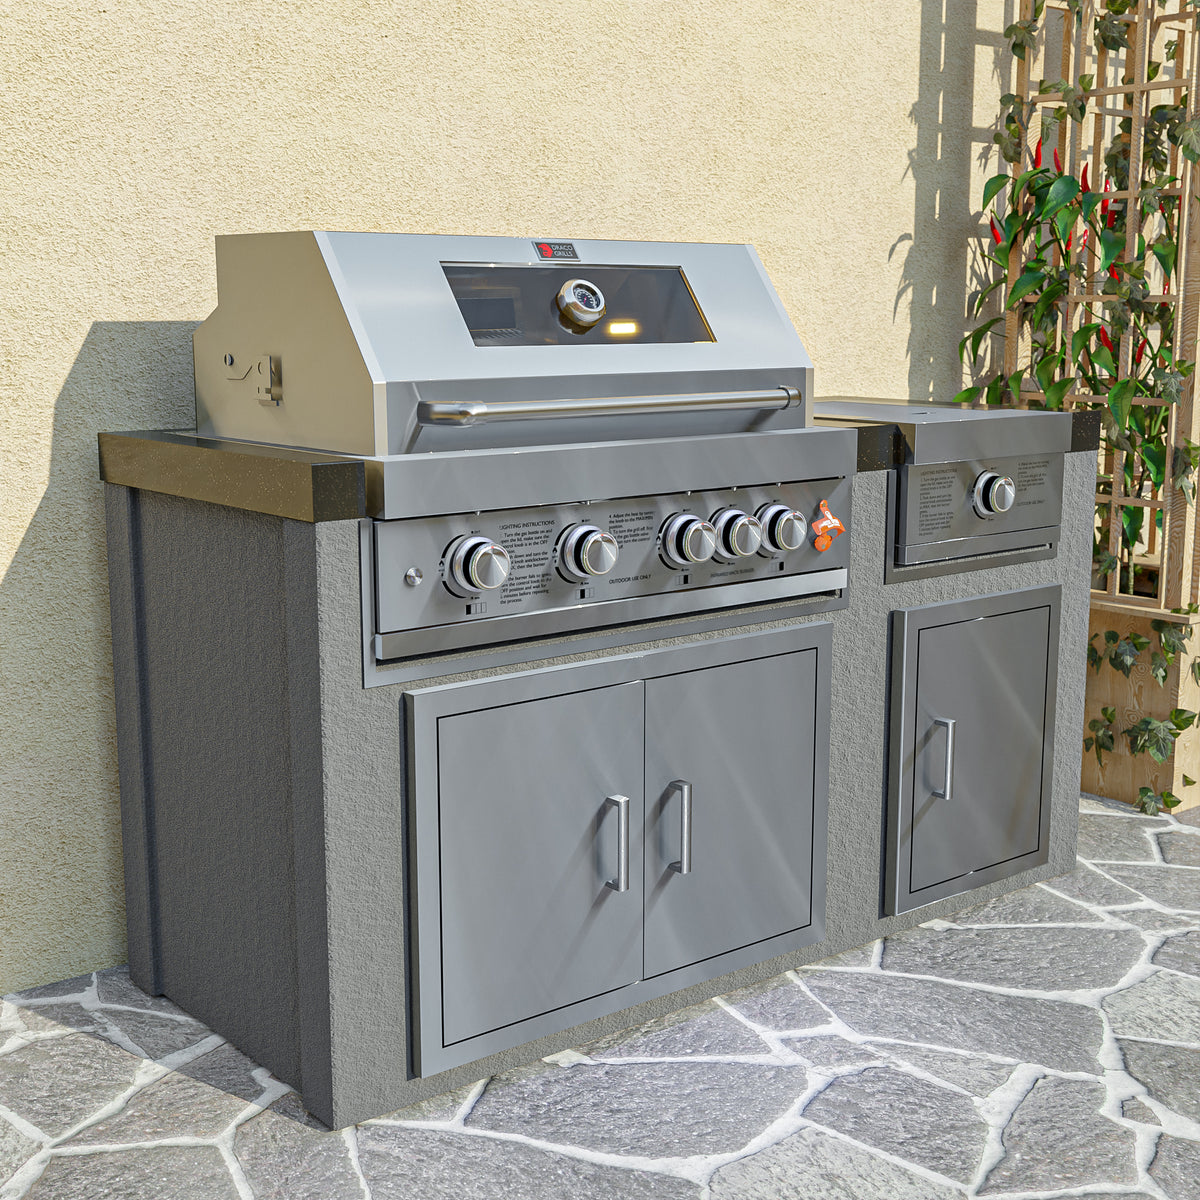 Draco Grills Avalon Stainless Steel Outdoor Kitchen with 4 Burner Barbecue and Side Burner